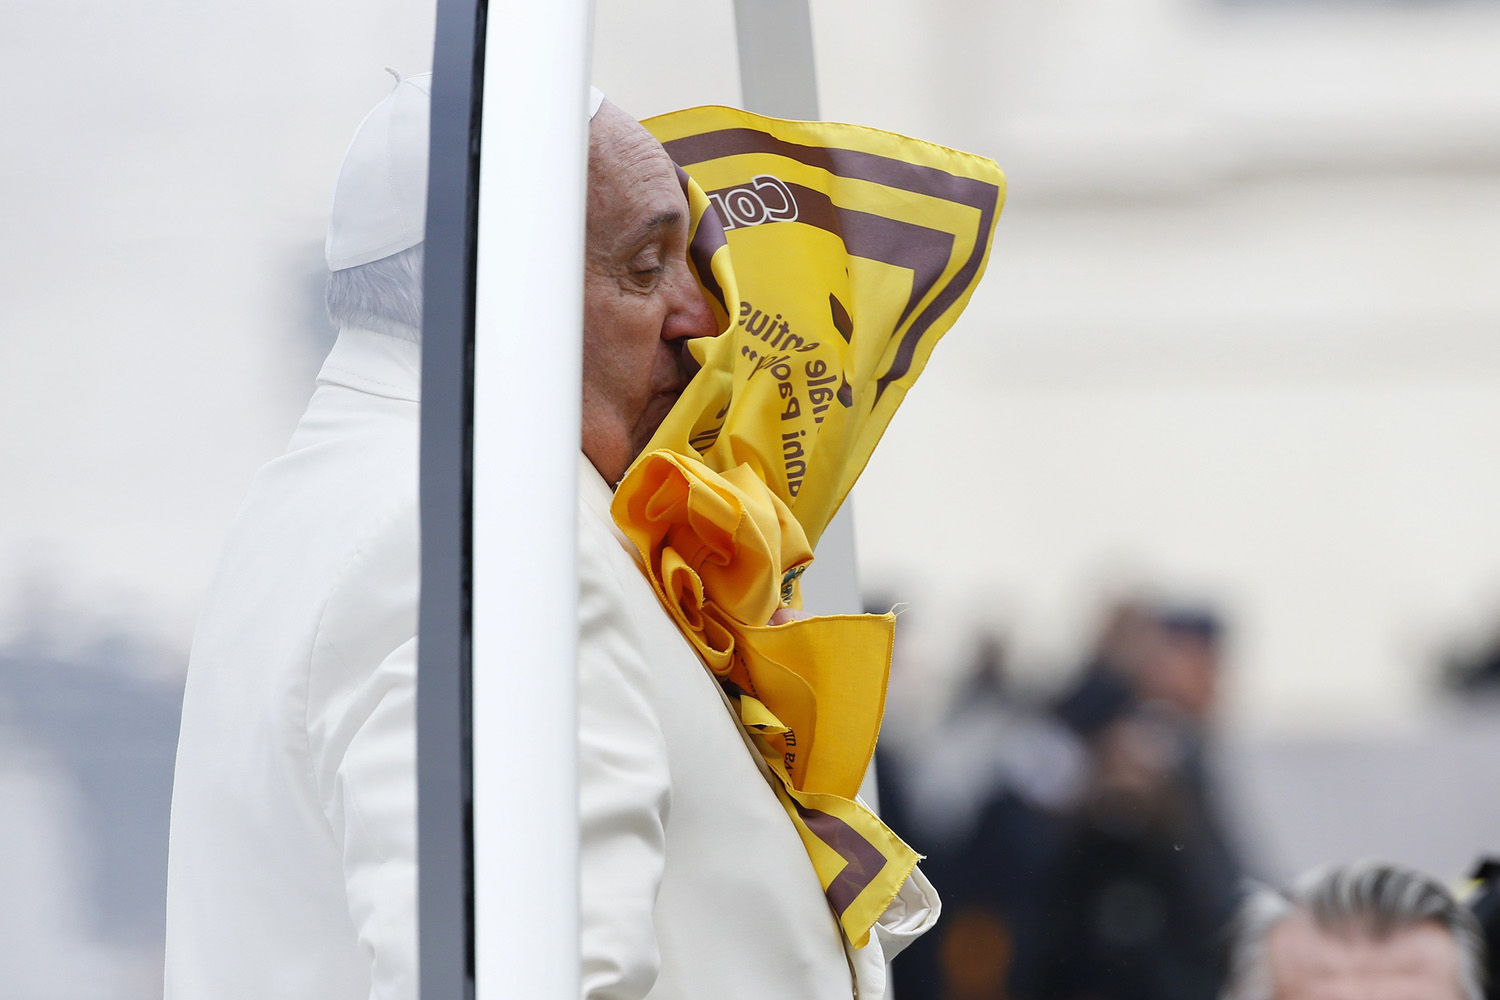 A scarf thrown by faithful is seen on the face of Pope Francis during the general audience in Saint Peter's Square at the Vatican